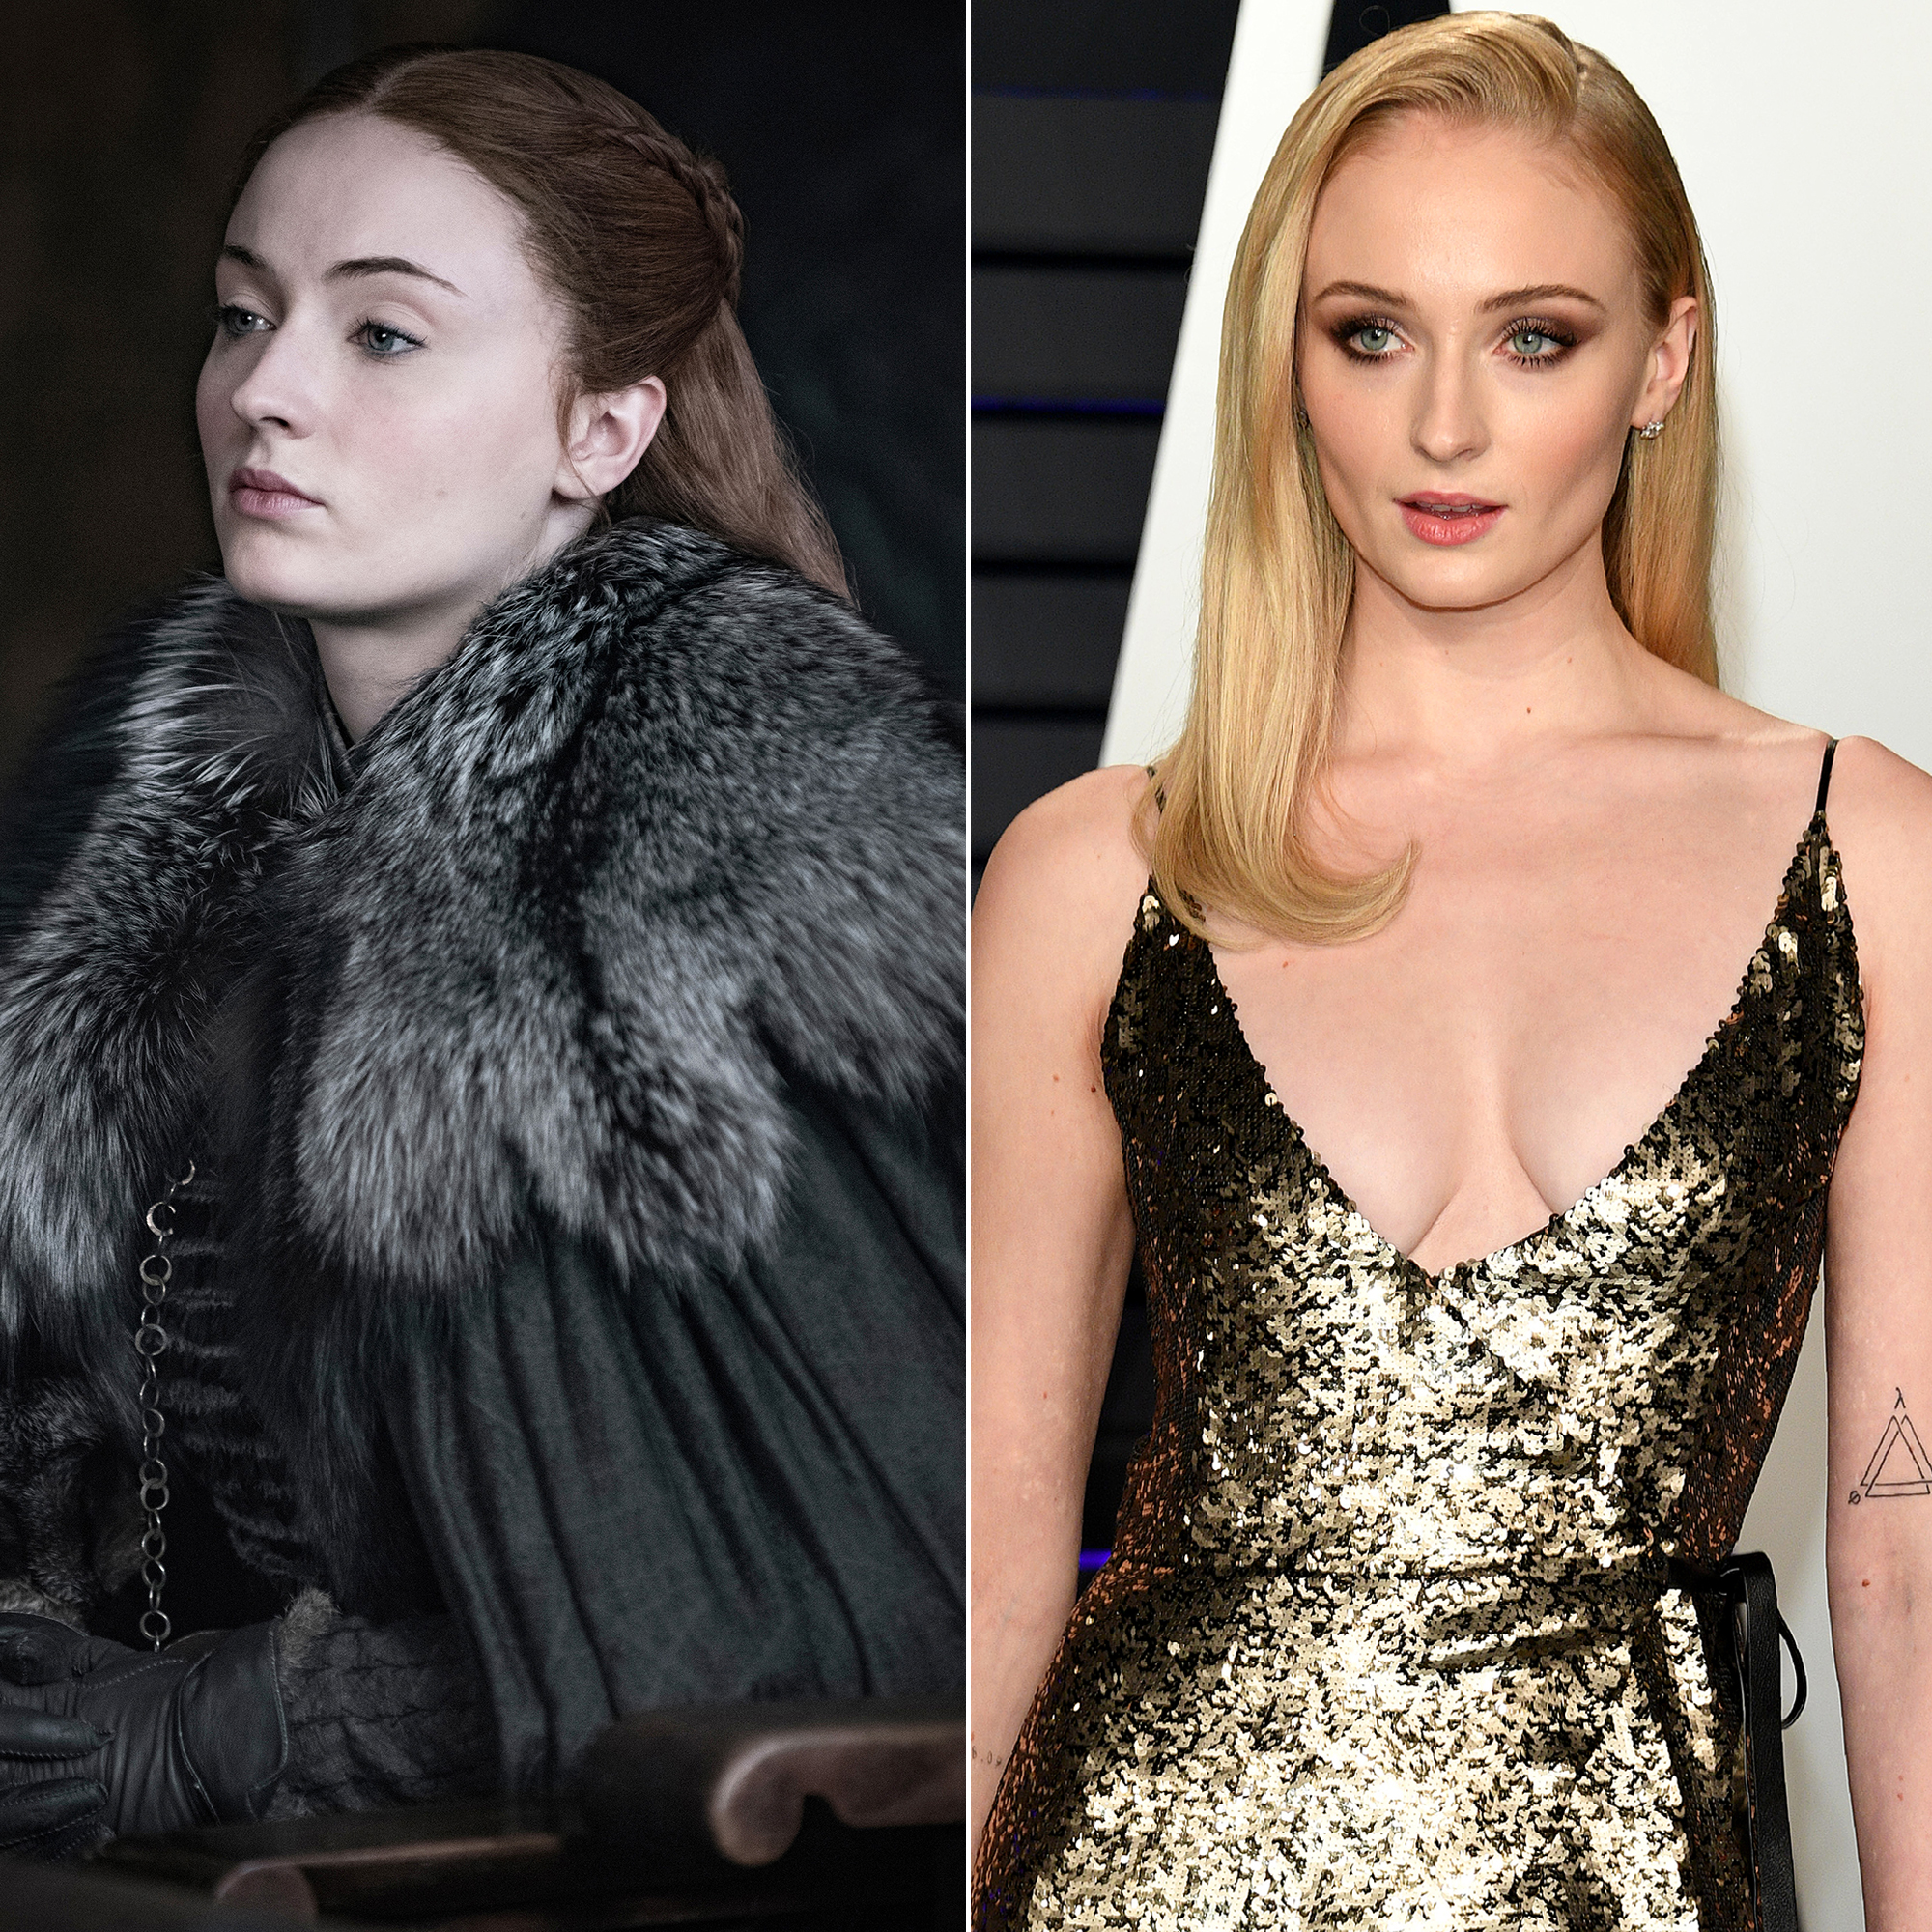 Where Is The Game Of Thrones Cast Now?